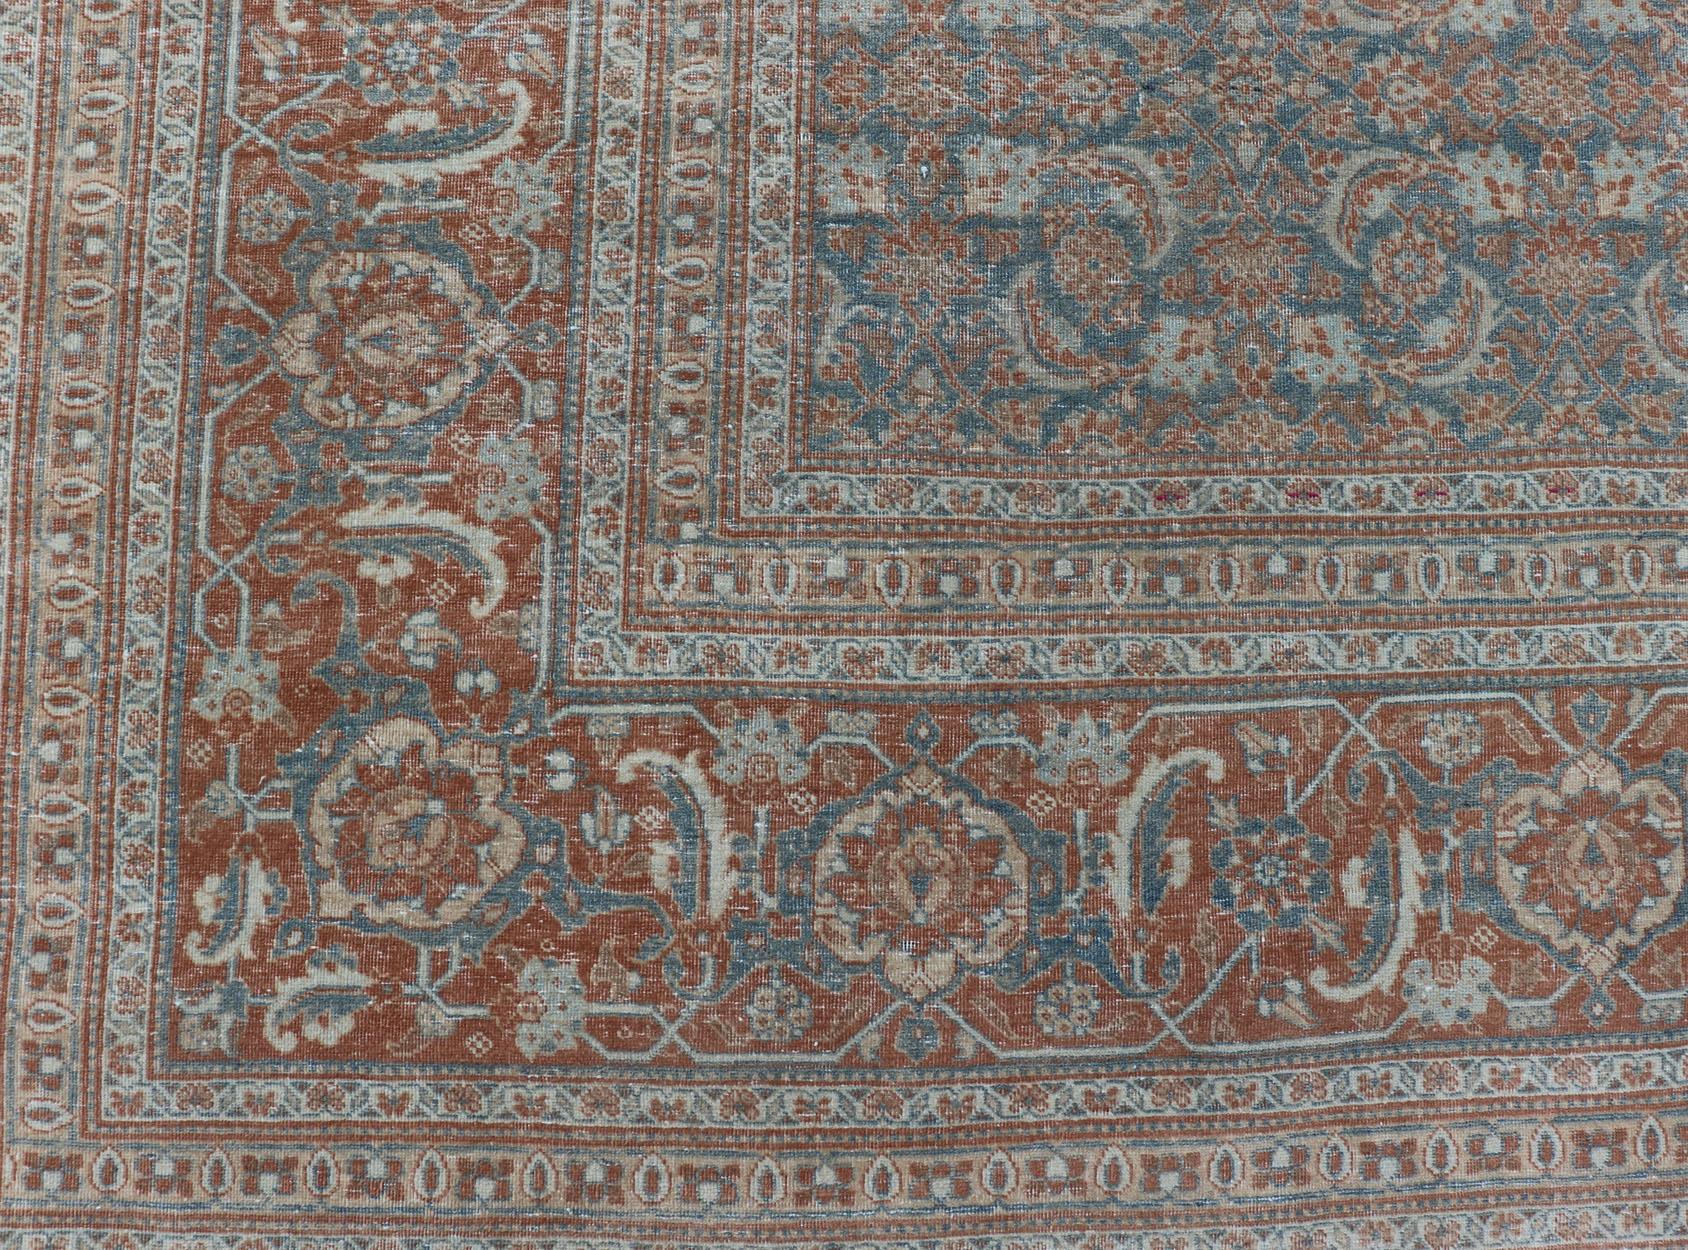 Large Antique Persian Tabriz Carpet with Herati Design in Gray Blue & Orange Red For Sale 7